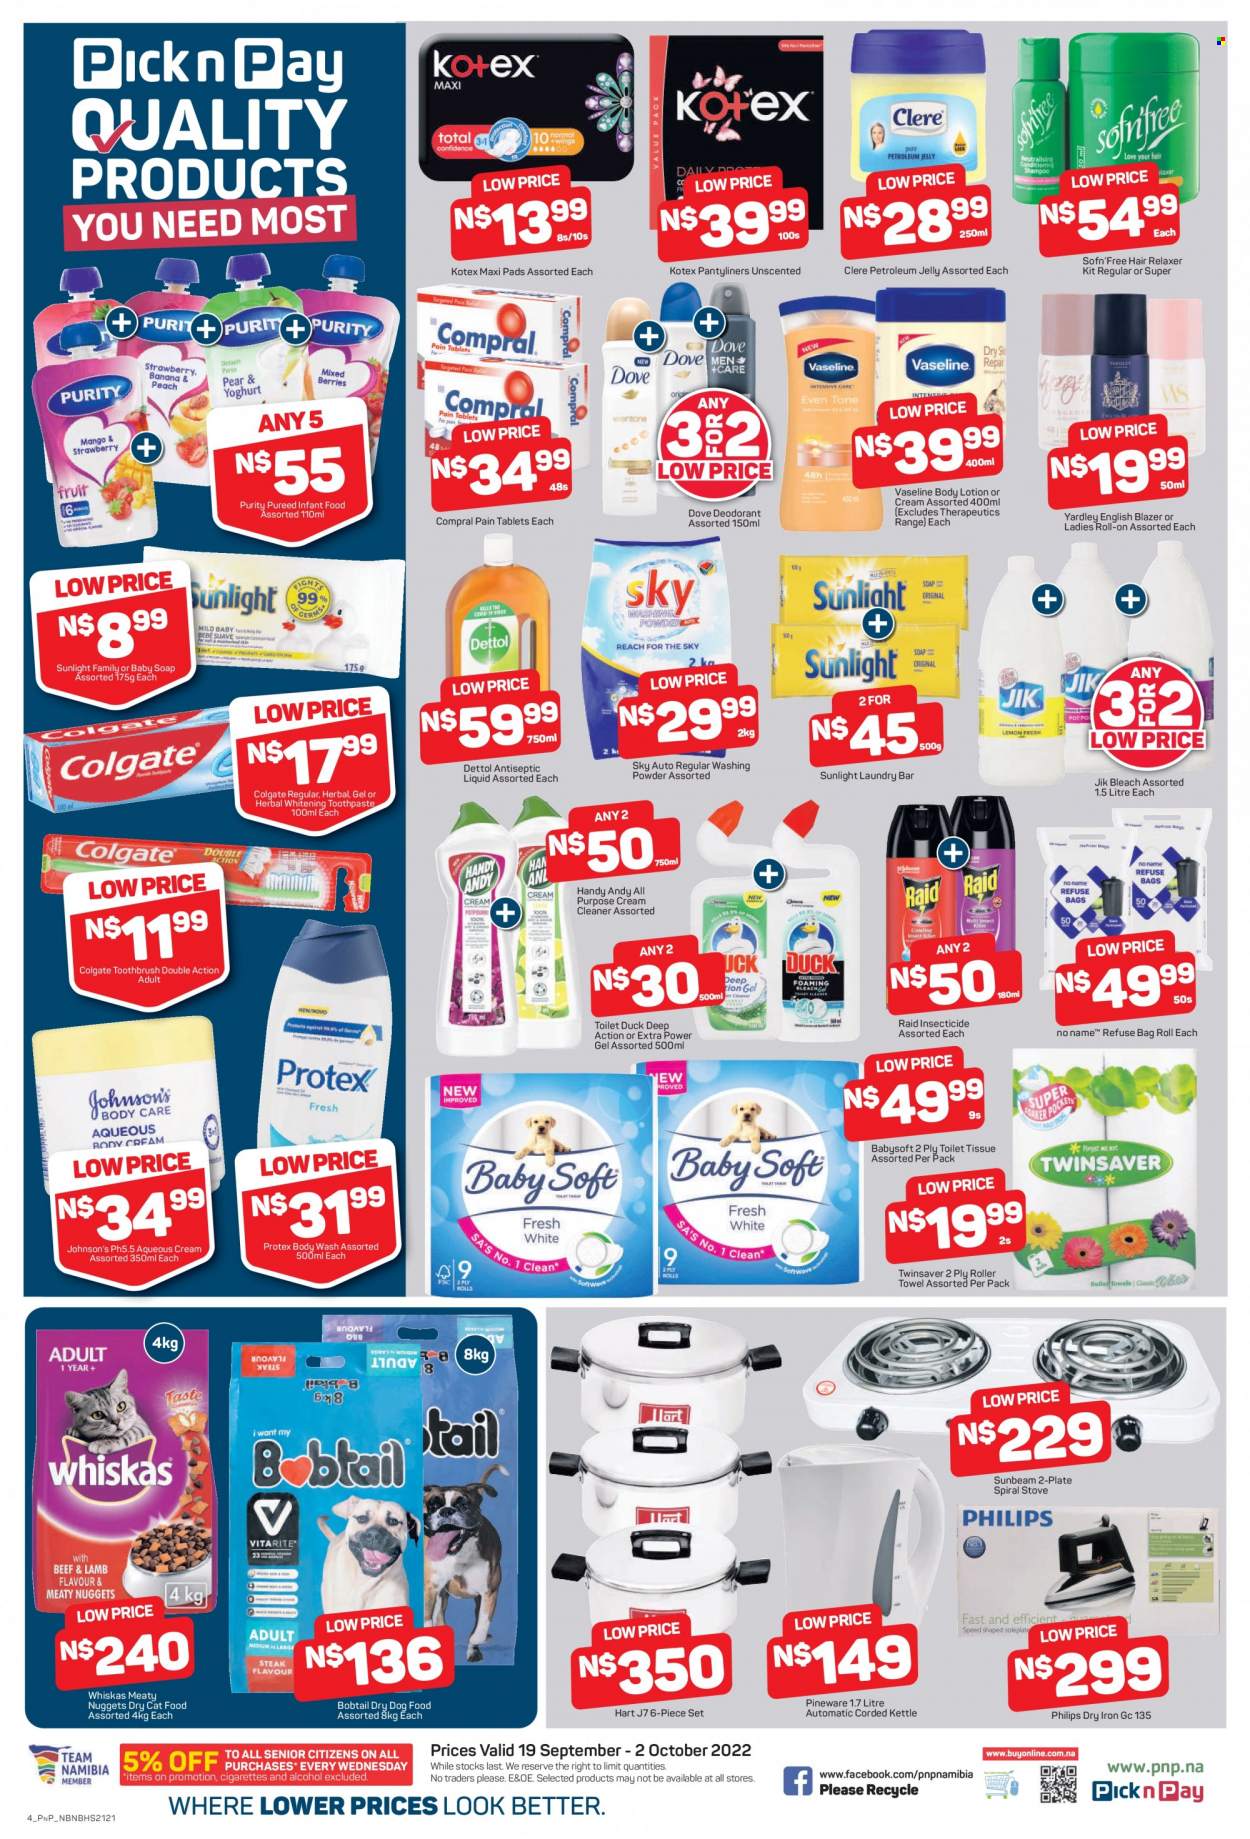 thumbnail - Pick n Pay catalogue  - 19/09/2022 - 02/10/2022 - Sales products - Dove, alcohol, Purity, Johnson's, Dettol, cream cleaner, bleach, cleaner, laundry powder, laundry soap bar, Sunlight, body wash, Protex, Vaseline, soap, Colgate, toothbrush, toothpaste, sanitary pads, Kotex, pantyliners, petroleum jelly, relaxer, body lotion, Clere, insecticide, Raid, Philips, animal food, cat food, dog food, Whiskas, dry dog food, dry cat food. Page 2.